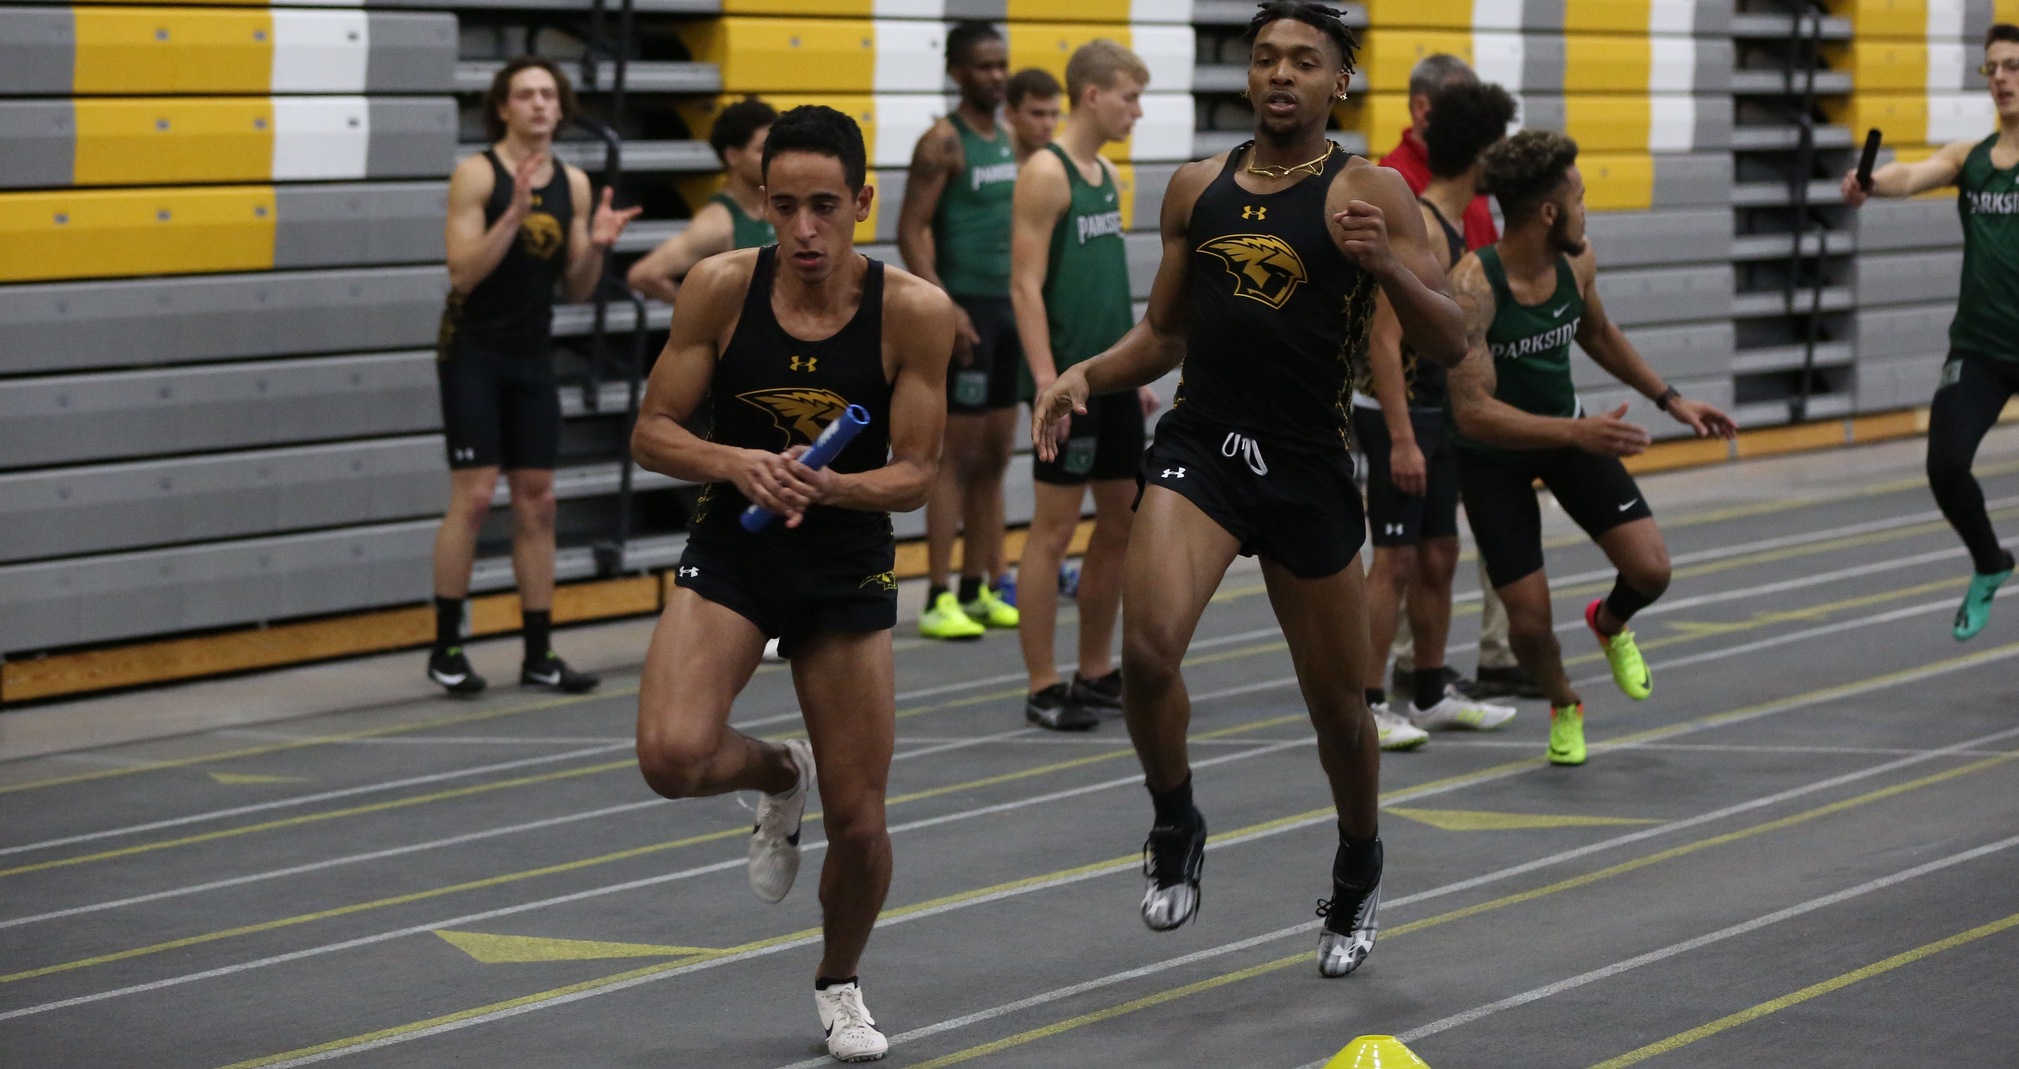 Steven Potter (front) and Amitai Wheat helped UW-Oshkosh record a winning time in the 1,600-meter relay.